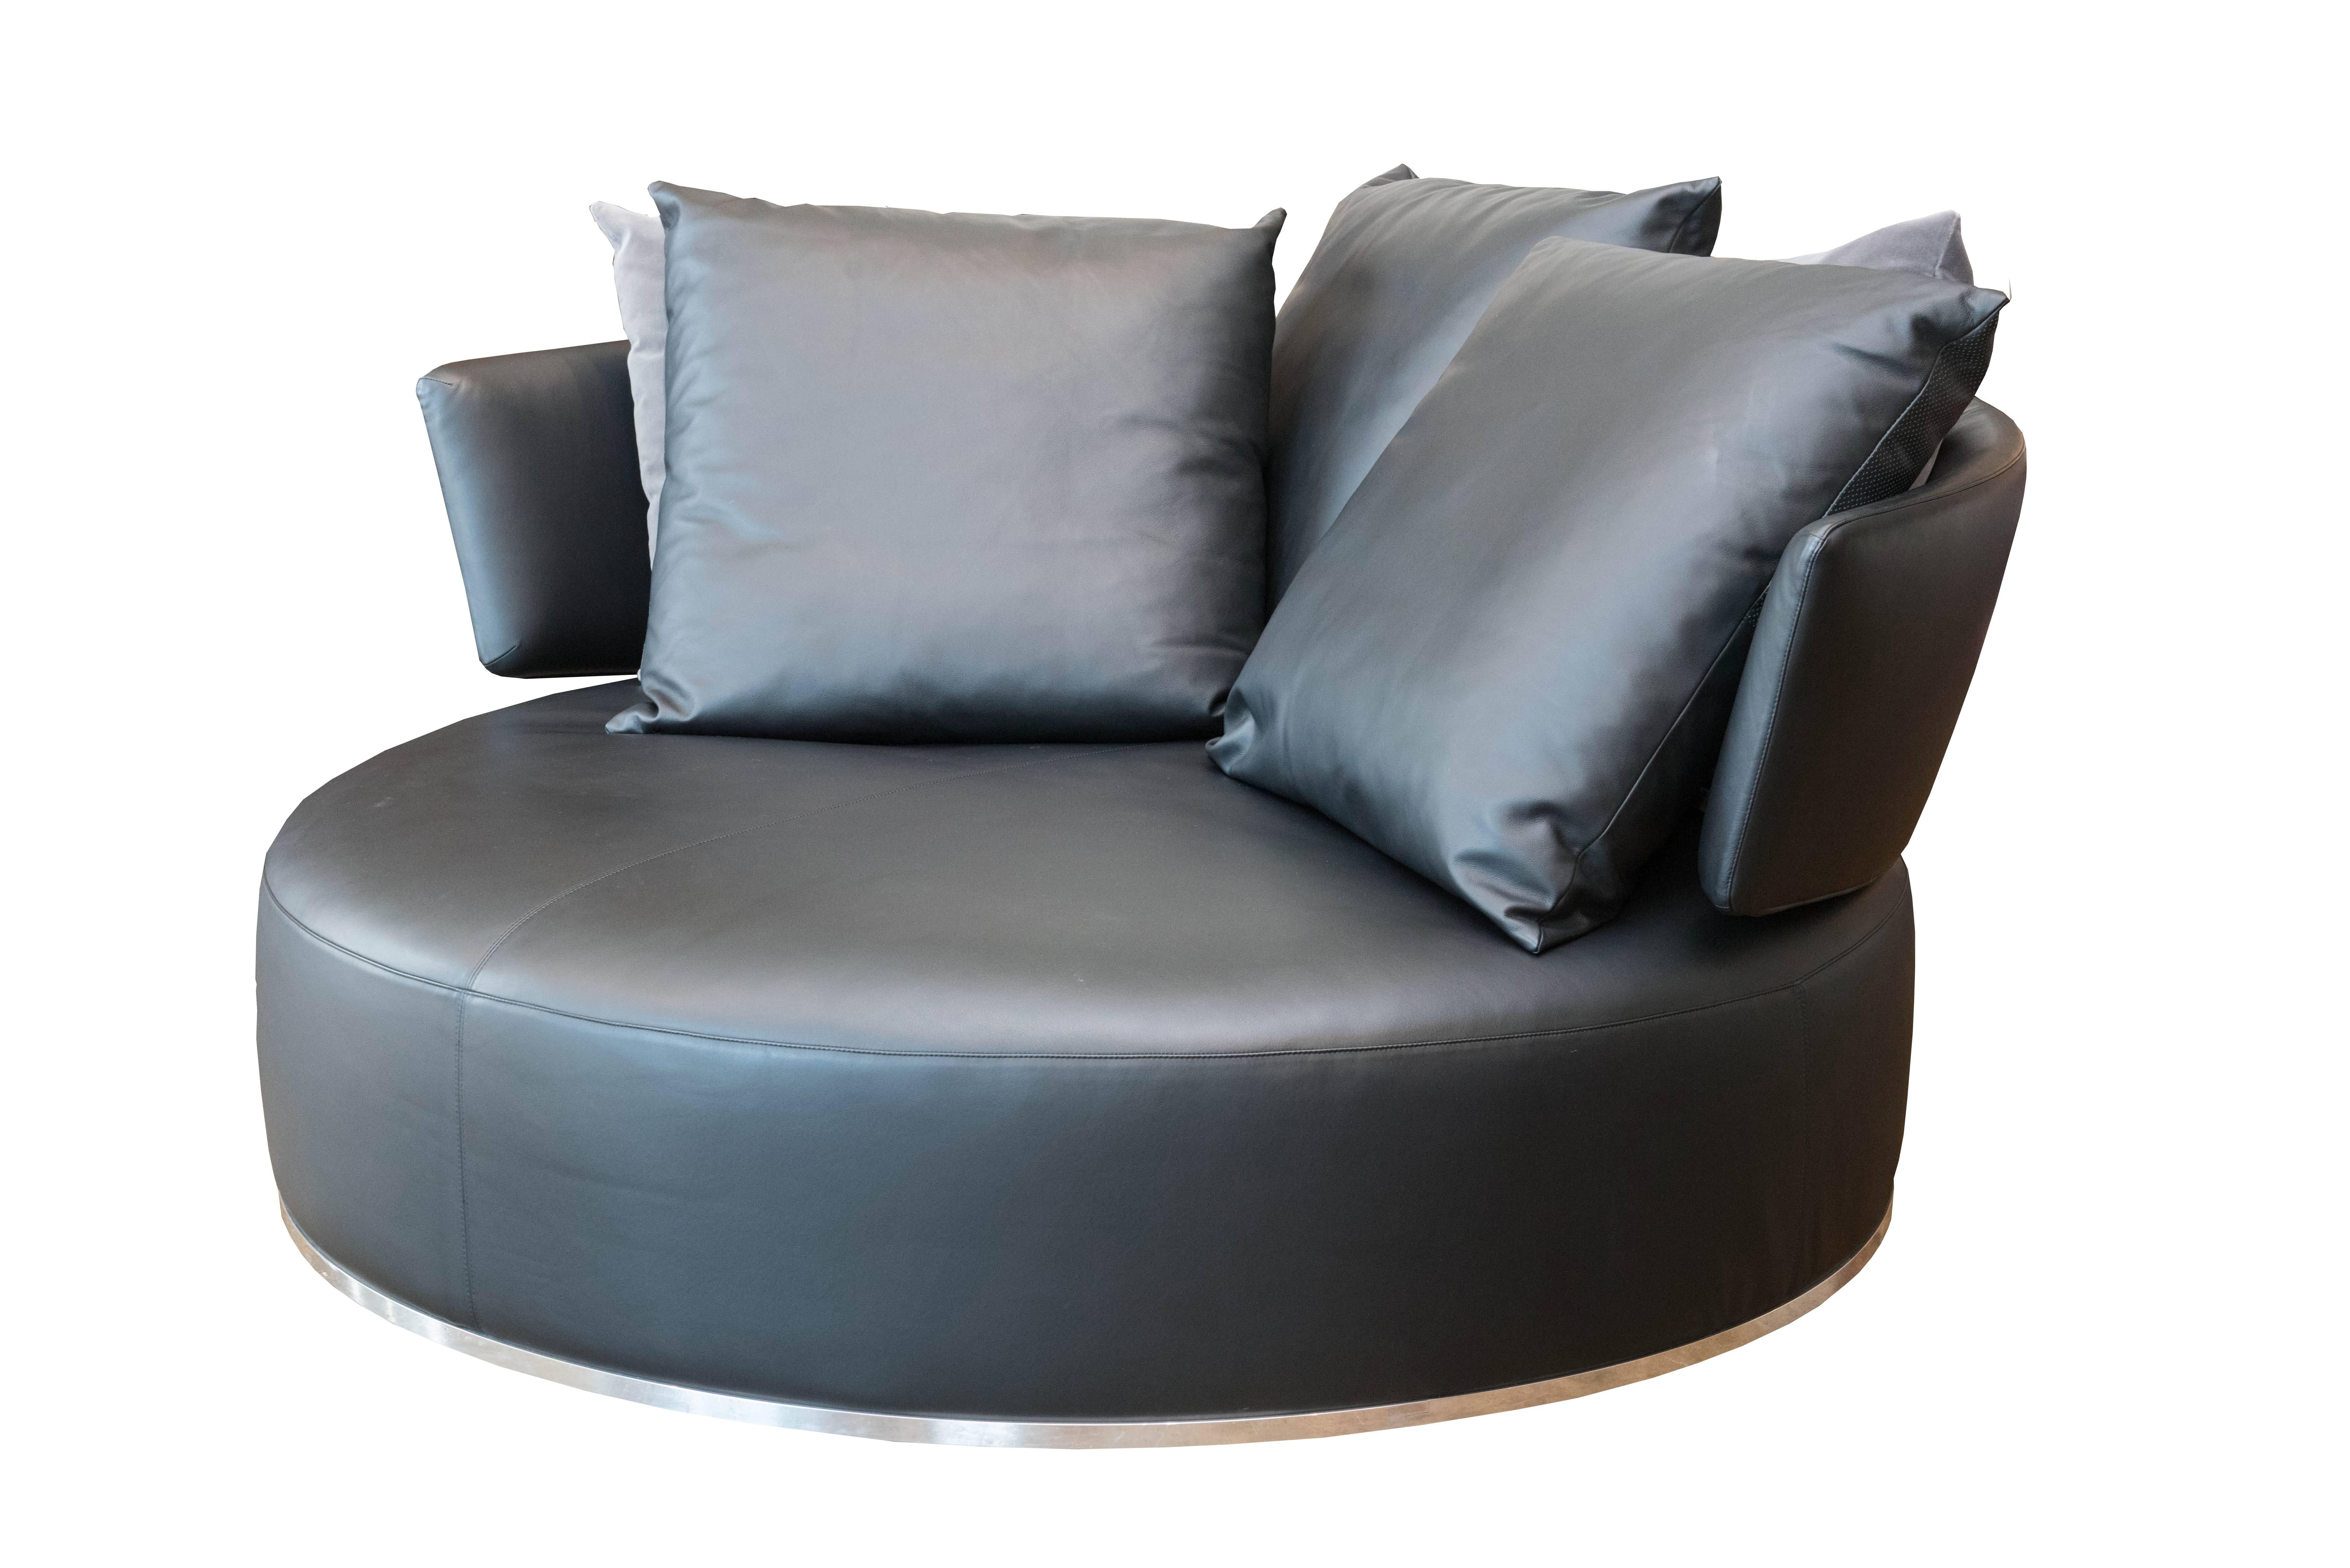 Description

Amoenus is a range of chairs with a strong personality offering great comfort. linear sofa with a deep seat padded with down; the corner or chaise longue version marked by a sizeable and enveloping backrest-armrest. the circular and